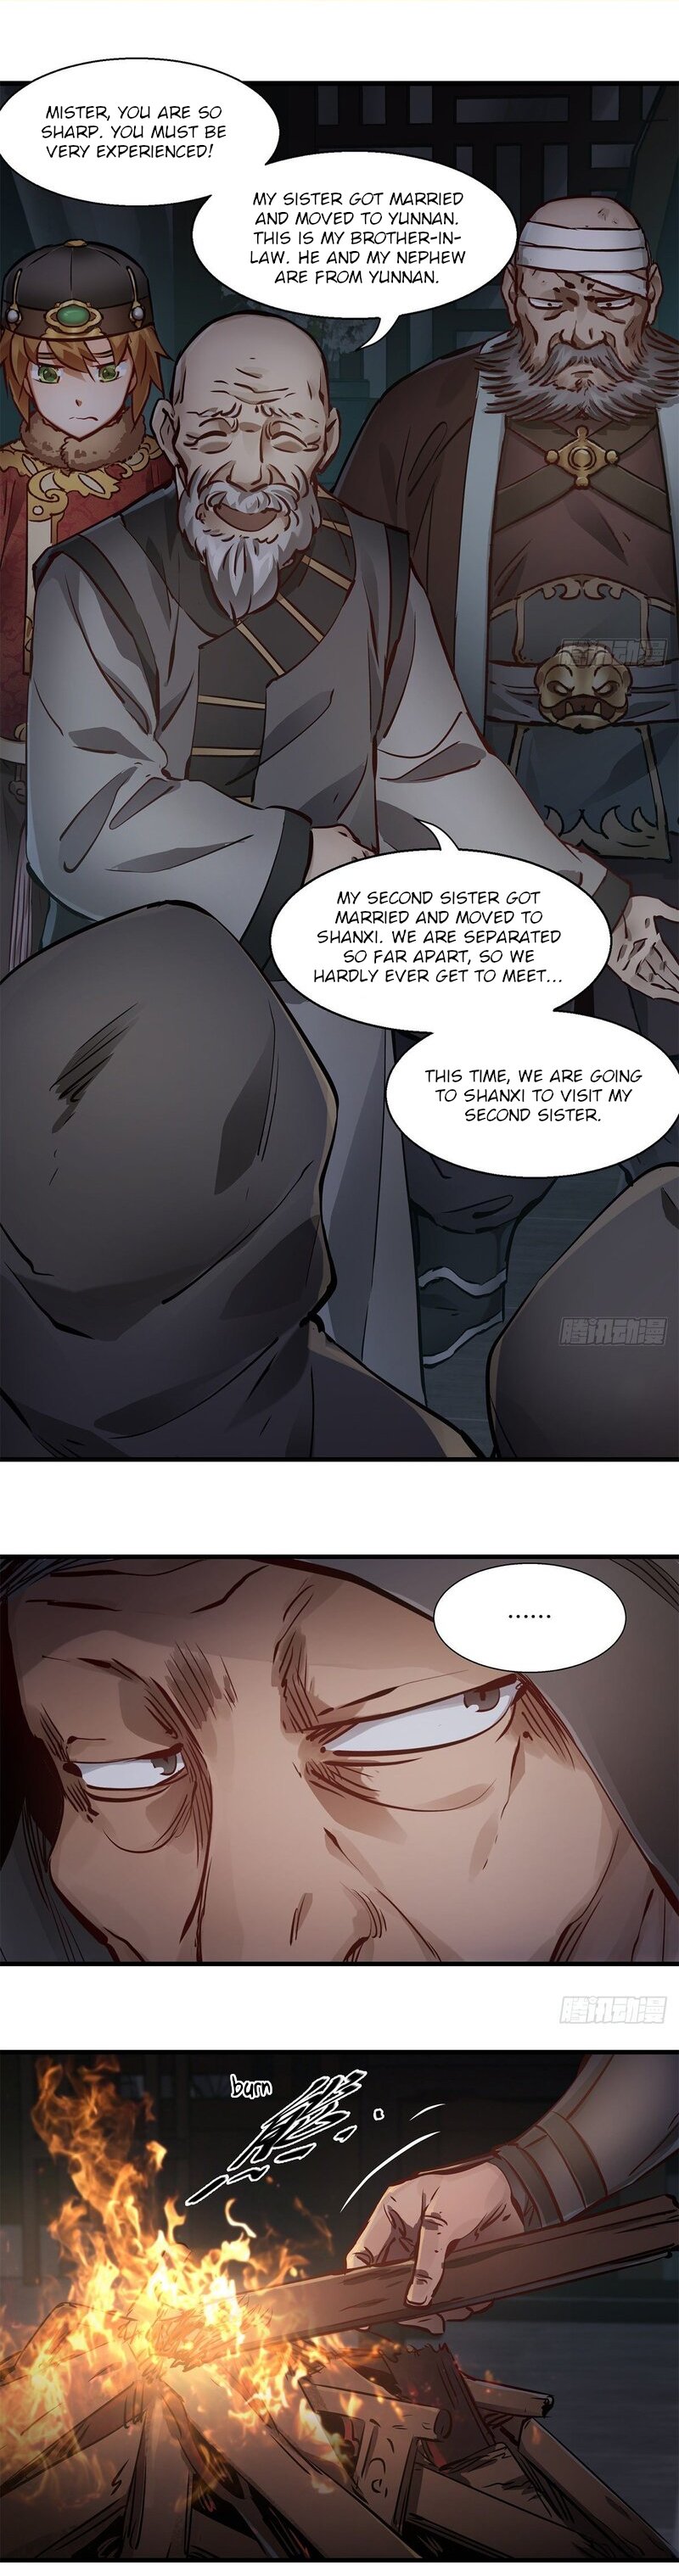 The Deer And The Cauldron - Page 2